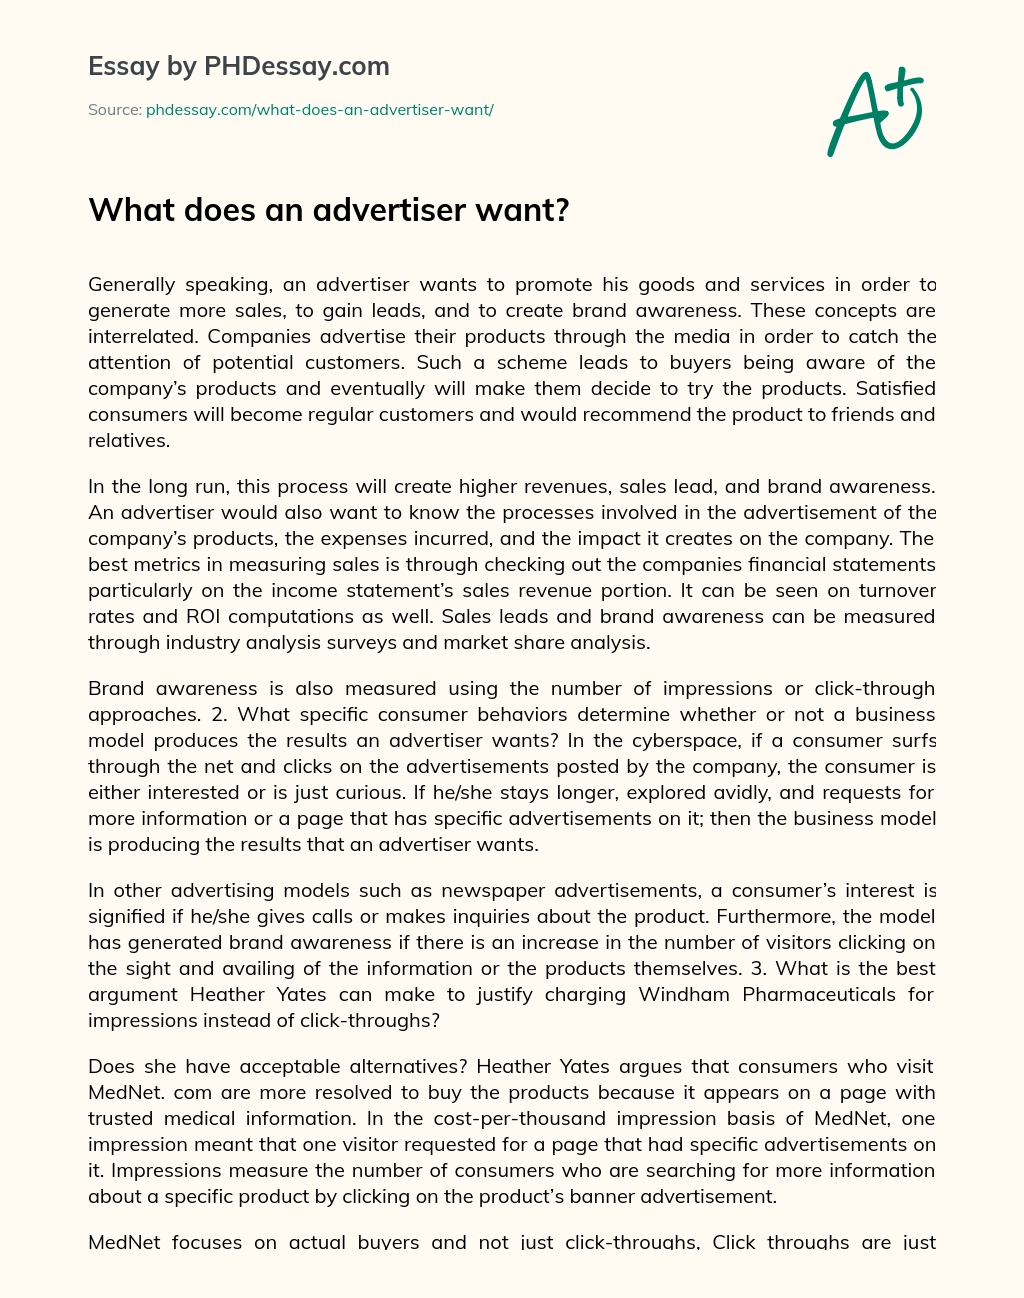 What does an advertiser want? essay